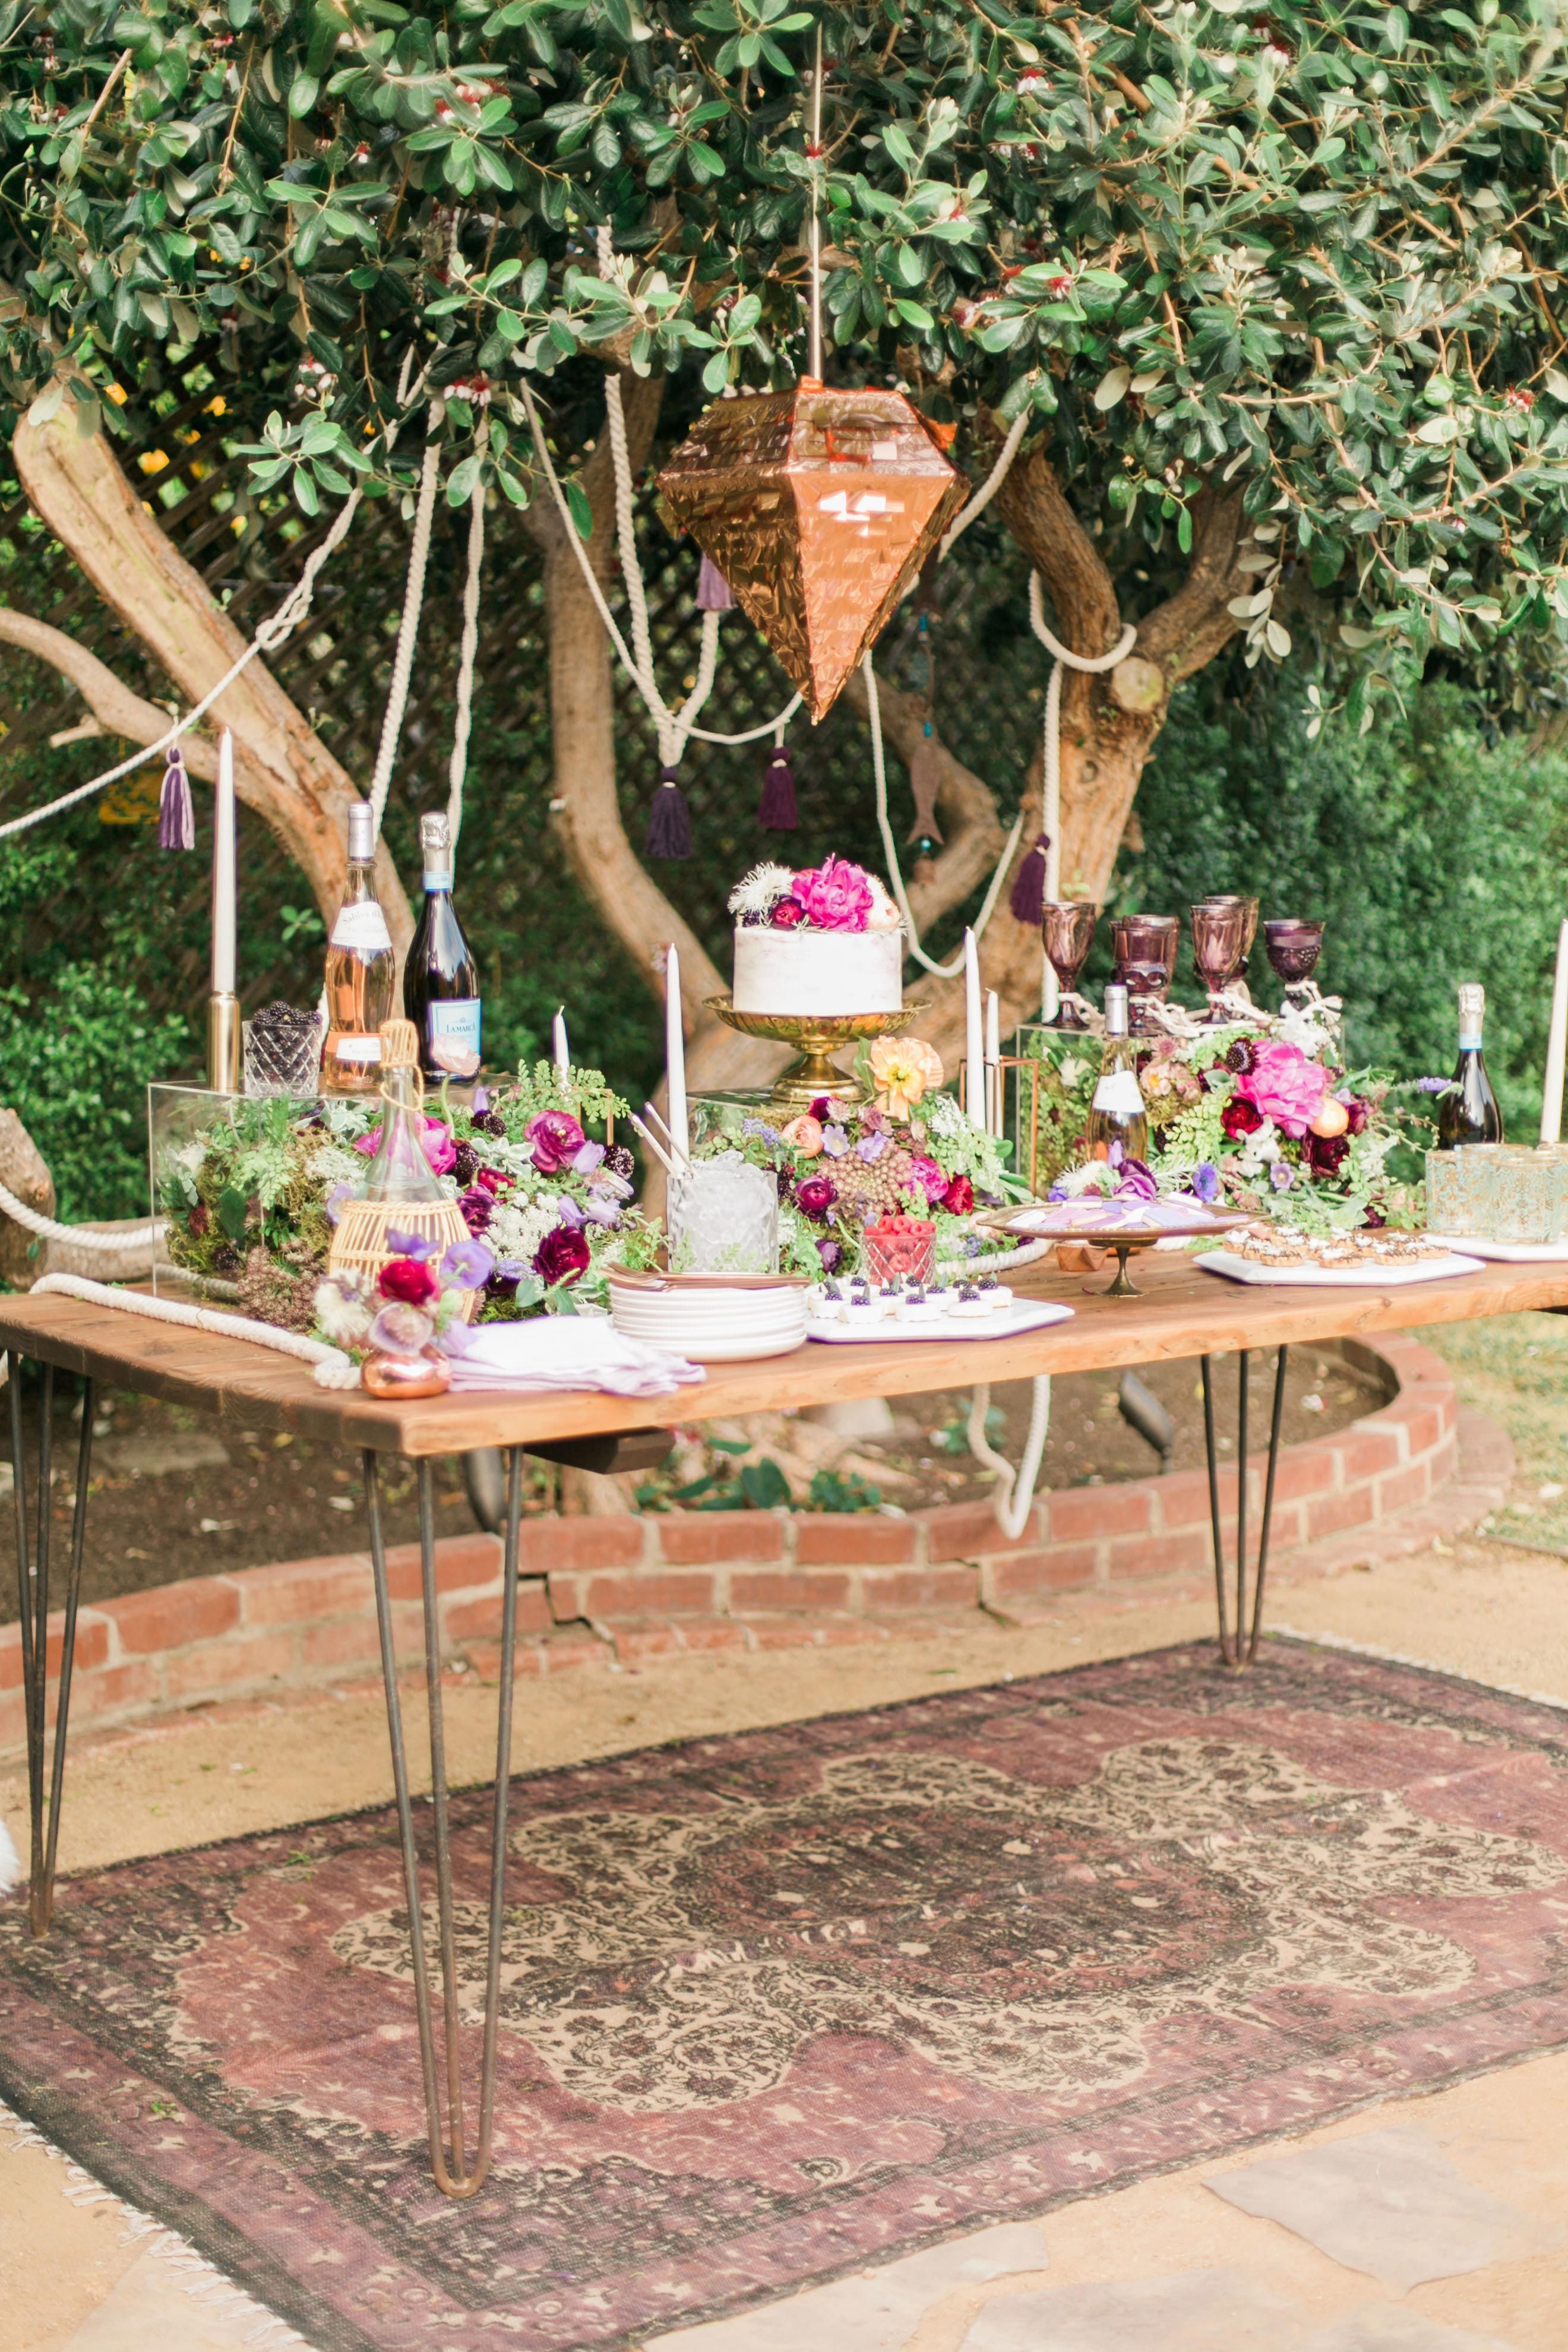 You'll Want to Pin Every Detail of This Boho-Chic Bachelorette Party - You'll Want to Pin Every Detail of This Boho-Chic Bachelorette Party -   15 style Bohemian party ideas